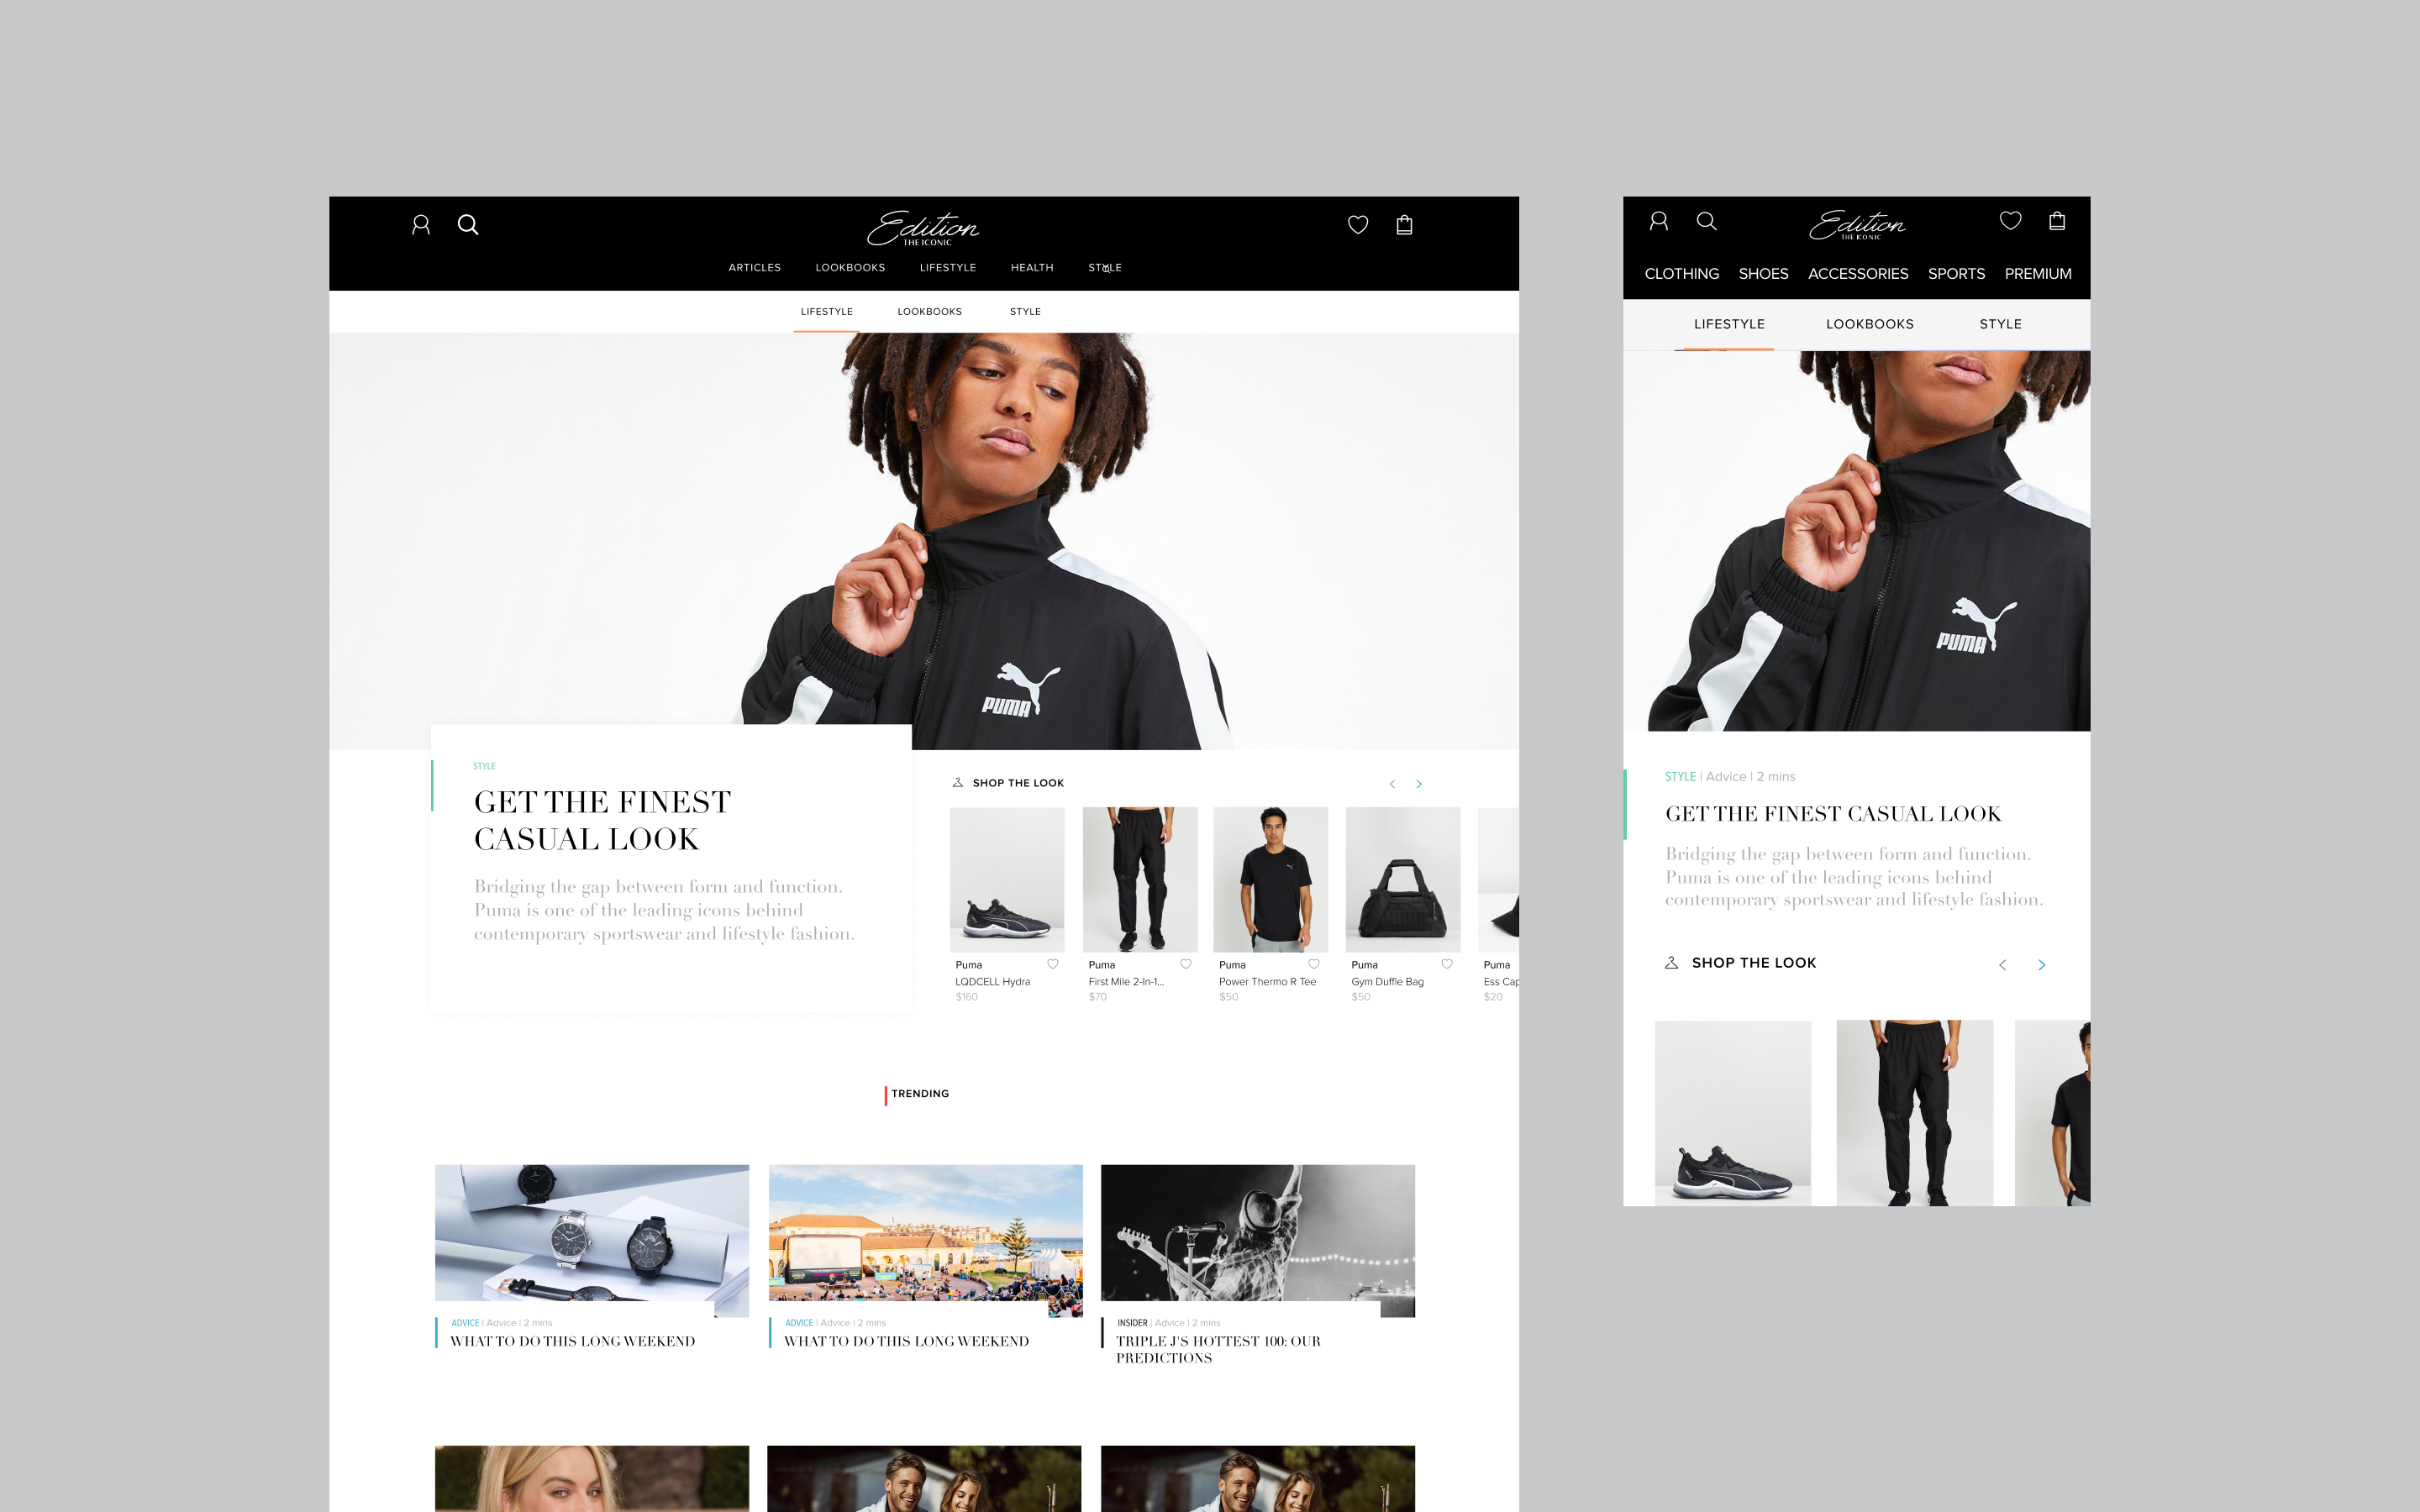 Edition by THE ICONIC's new homepage design, showcasing editorial and retail items